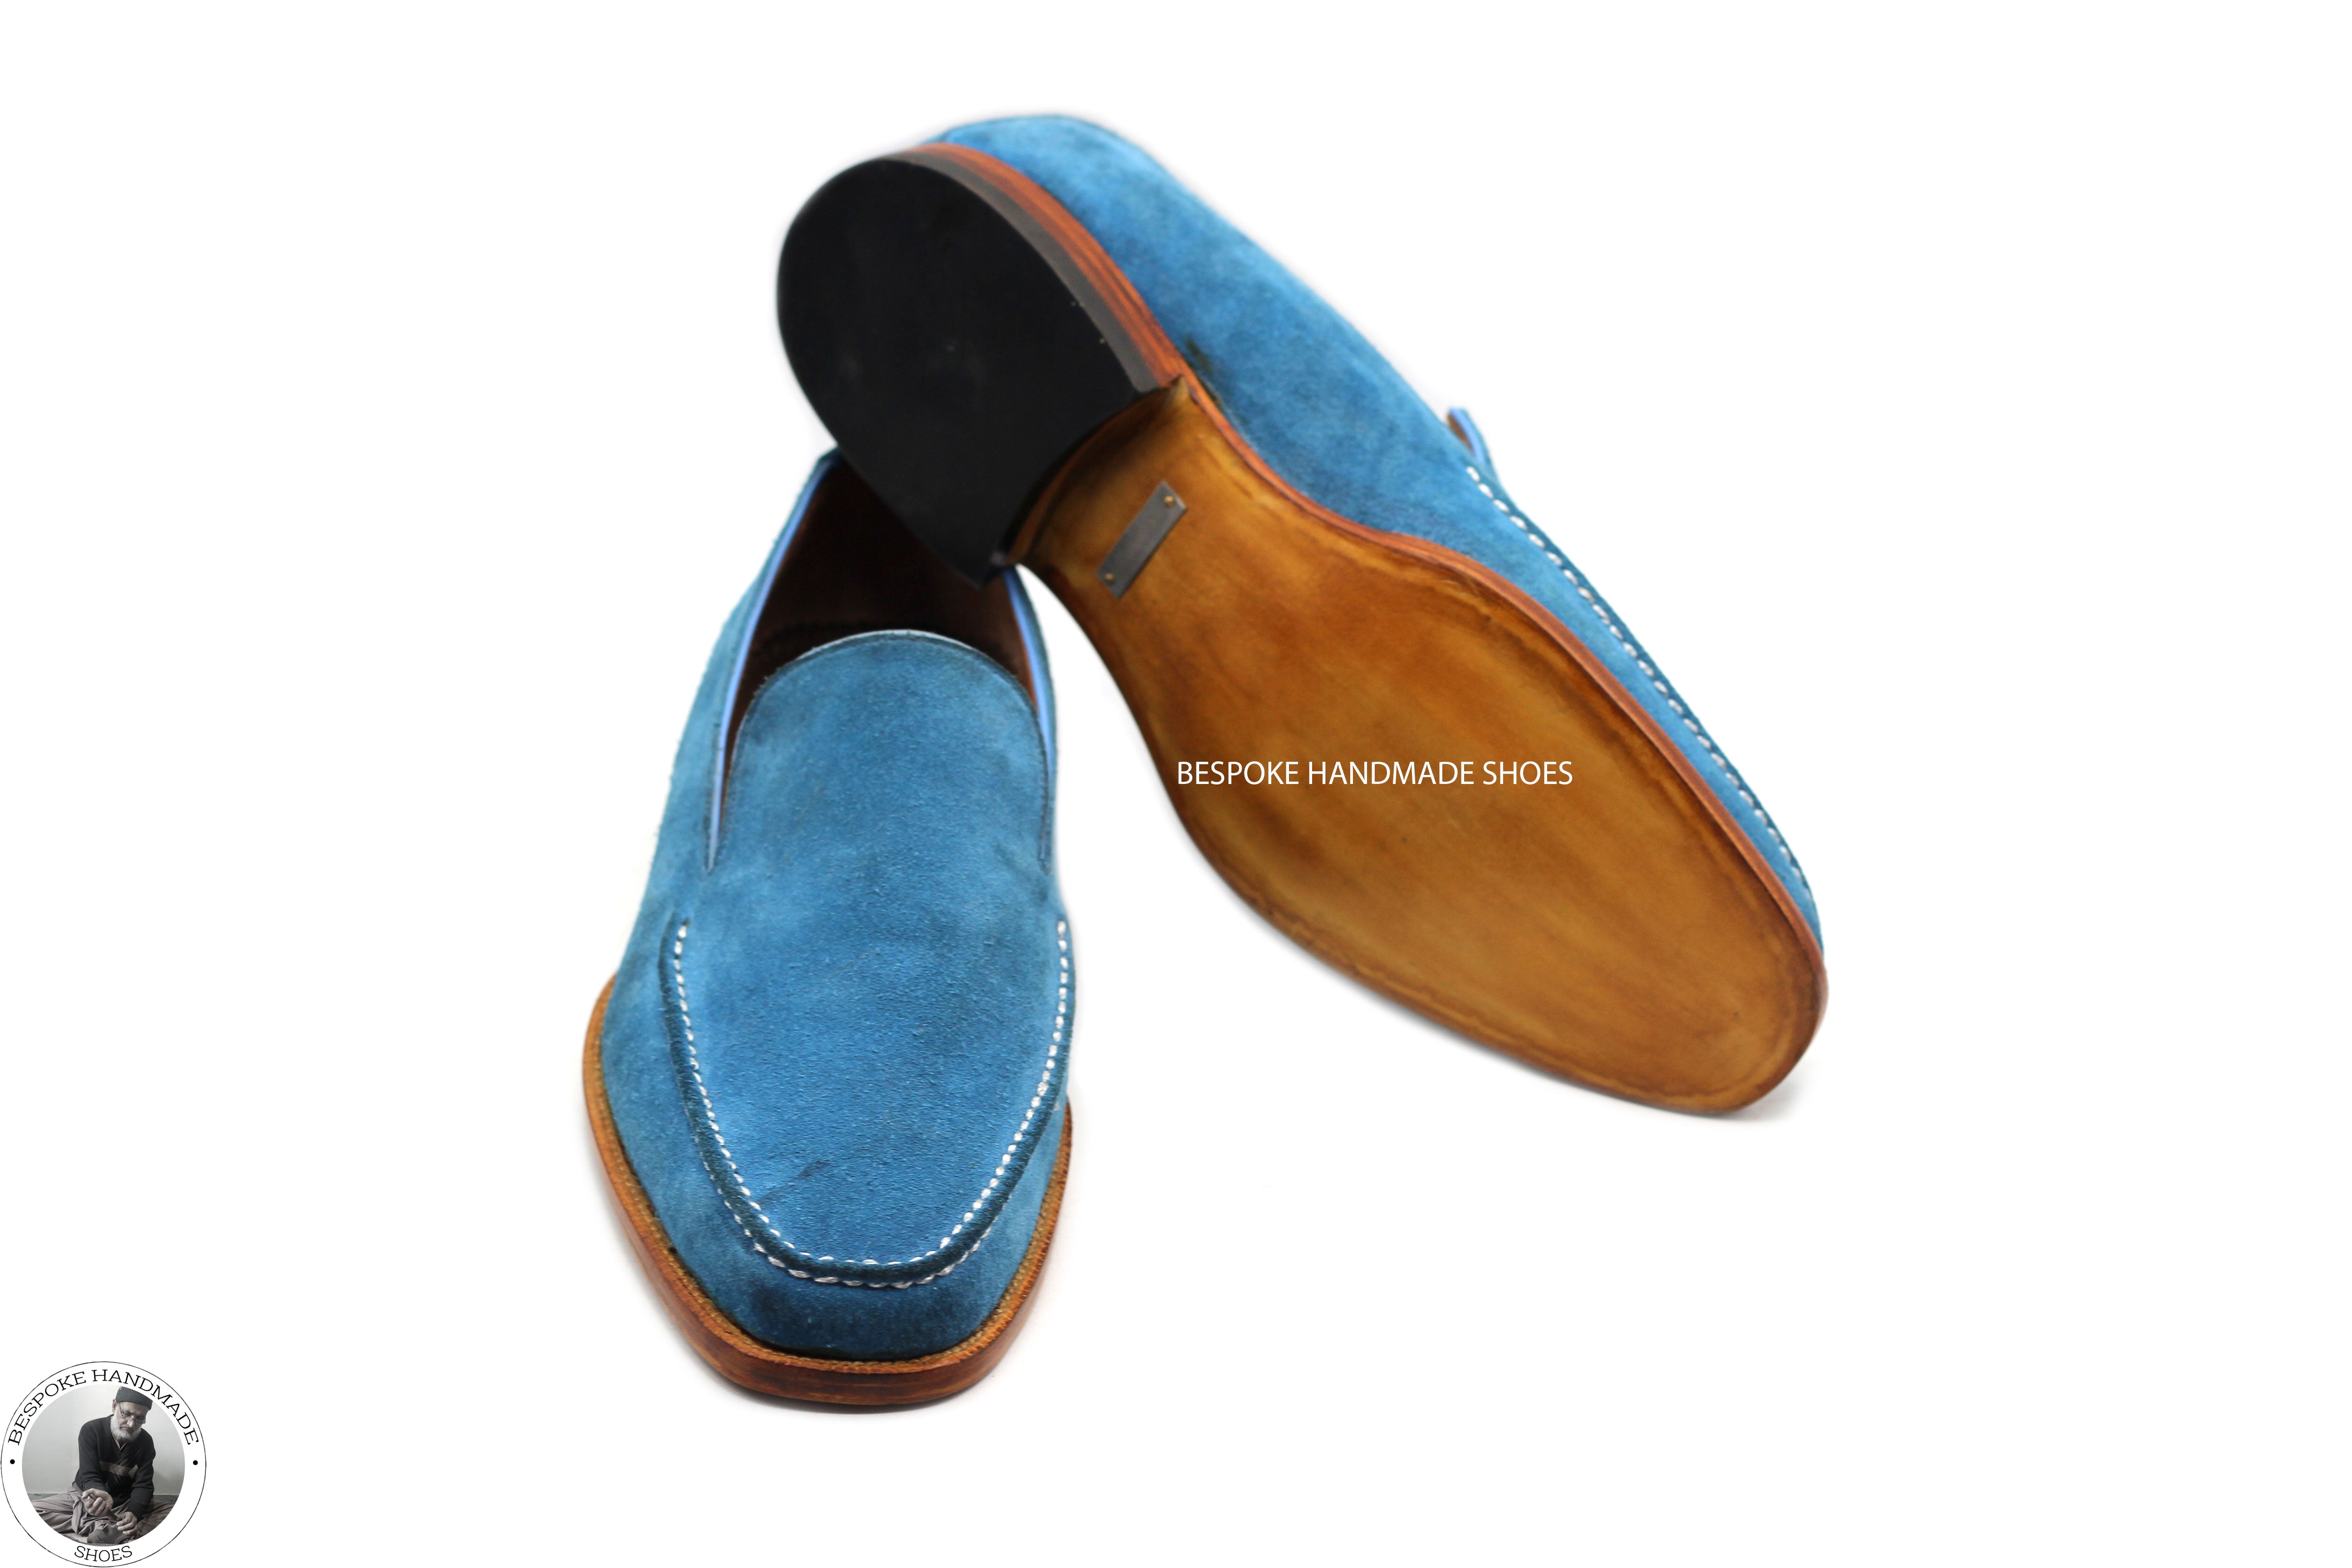 Buy Handmade Goodyear Welted Genuine Blue Suede Loafer Slip on Moccasin Men's Shoes